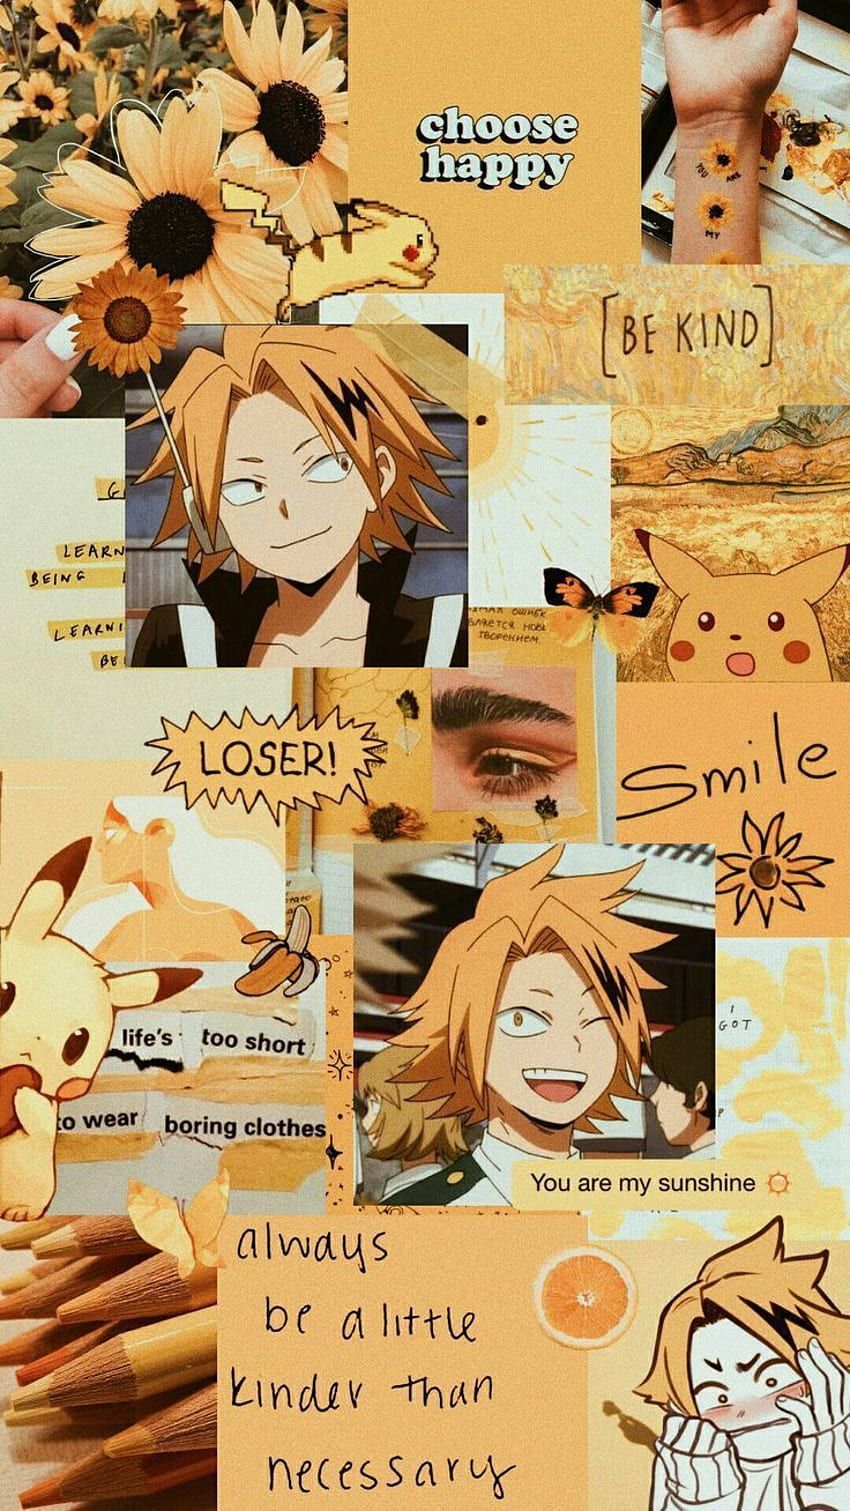 Aesthetic wallpaper background with anime characters and quotes - Denki Kaminari